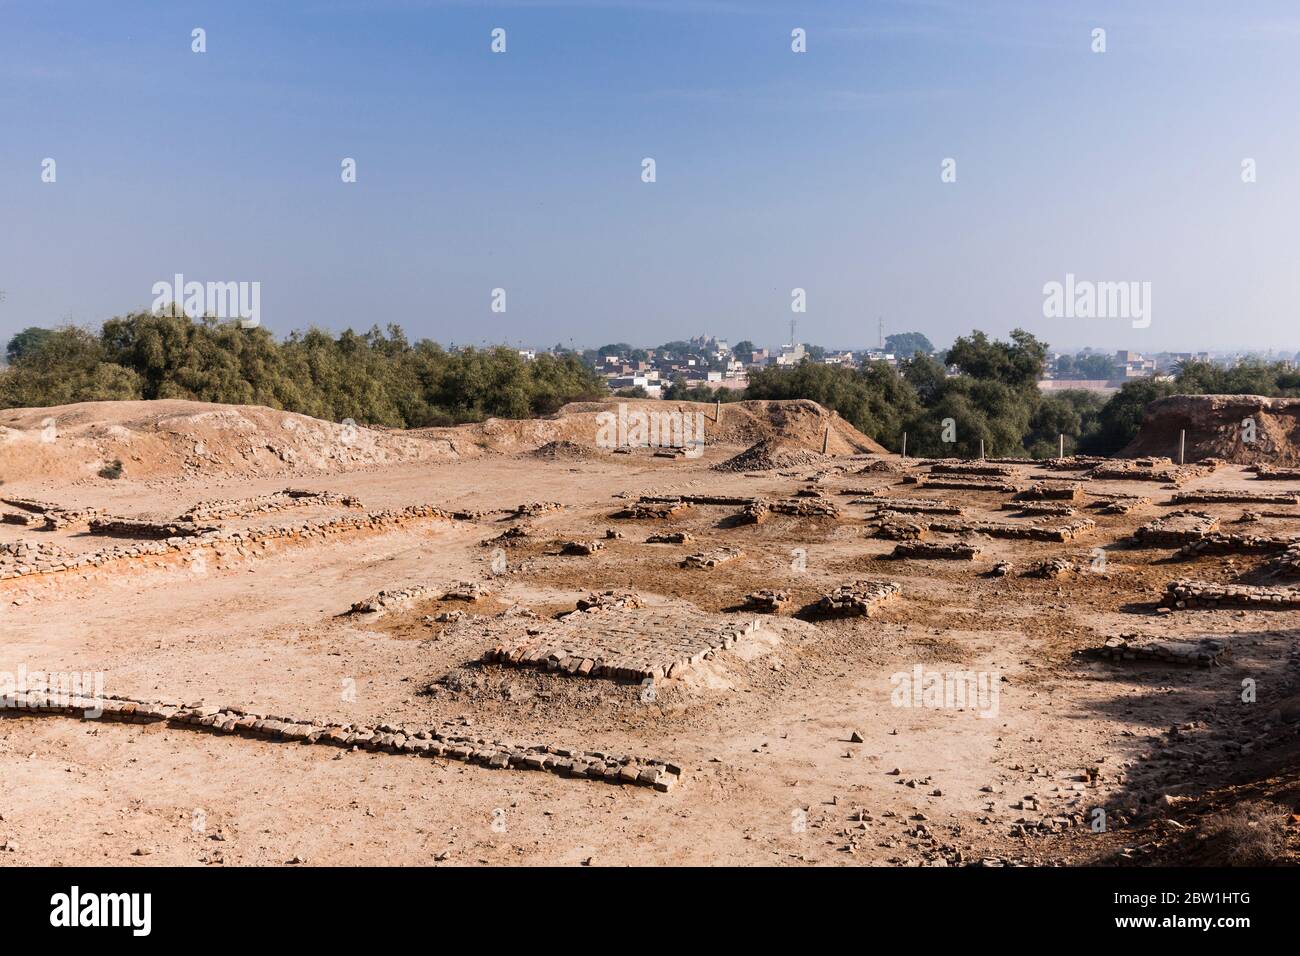 Archaeological site of Harappa, Harappan Civilisation, Indus Valley Civilisation, Sahiwal District, Punjab Province, Pakistan, South Asia, Asia Stock Photo